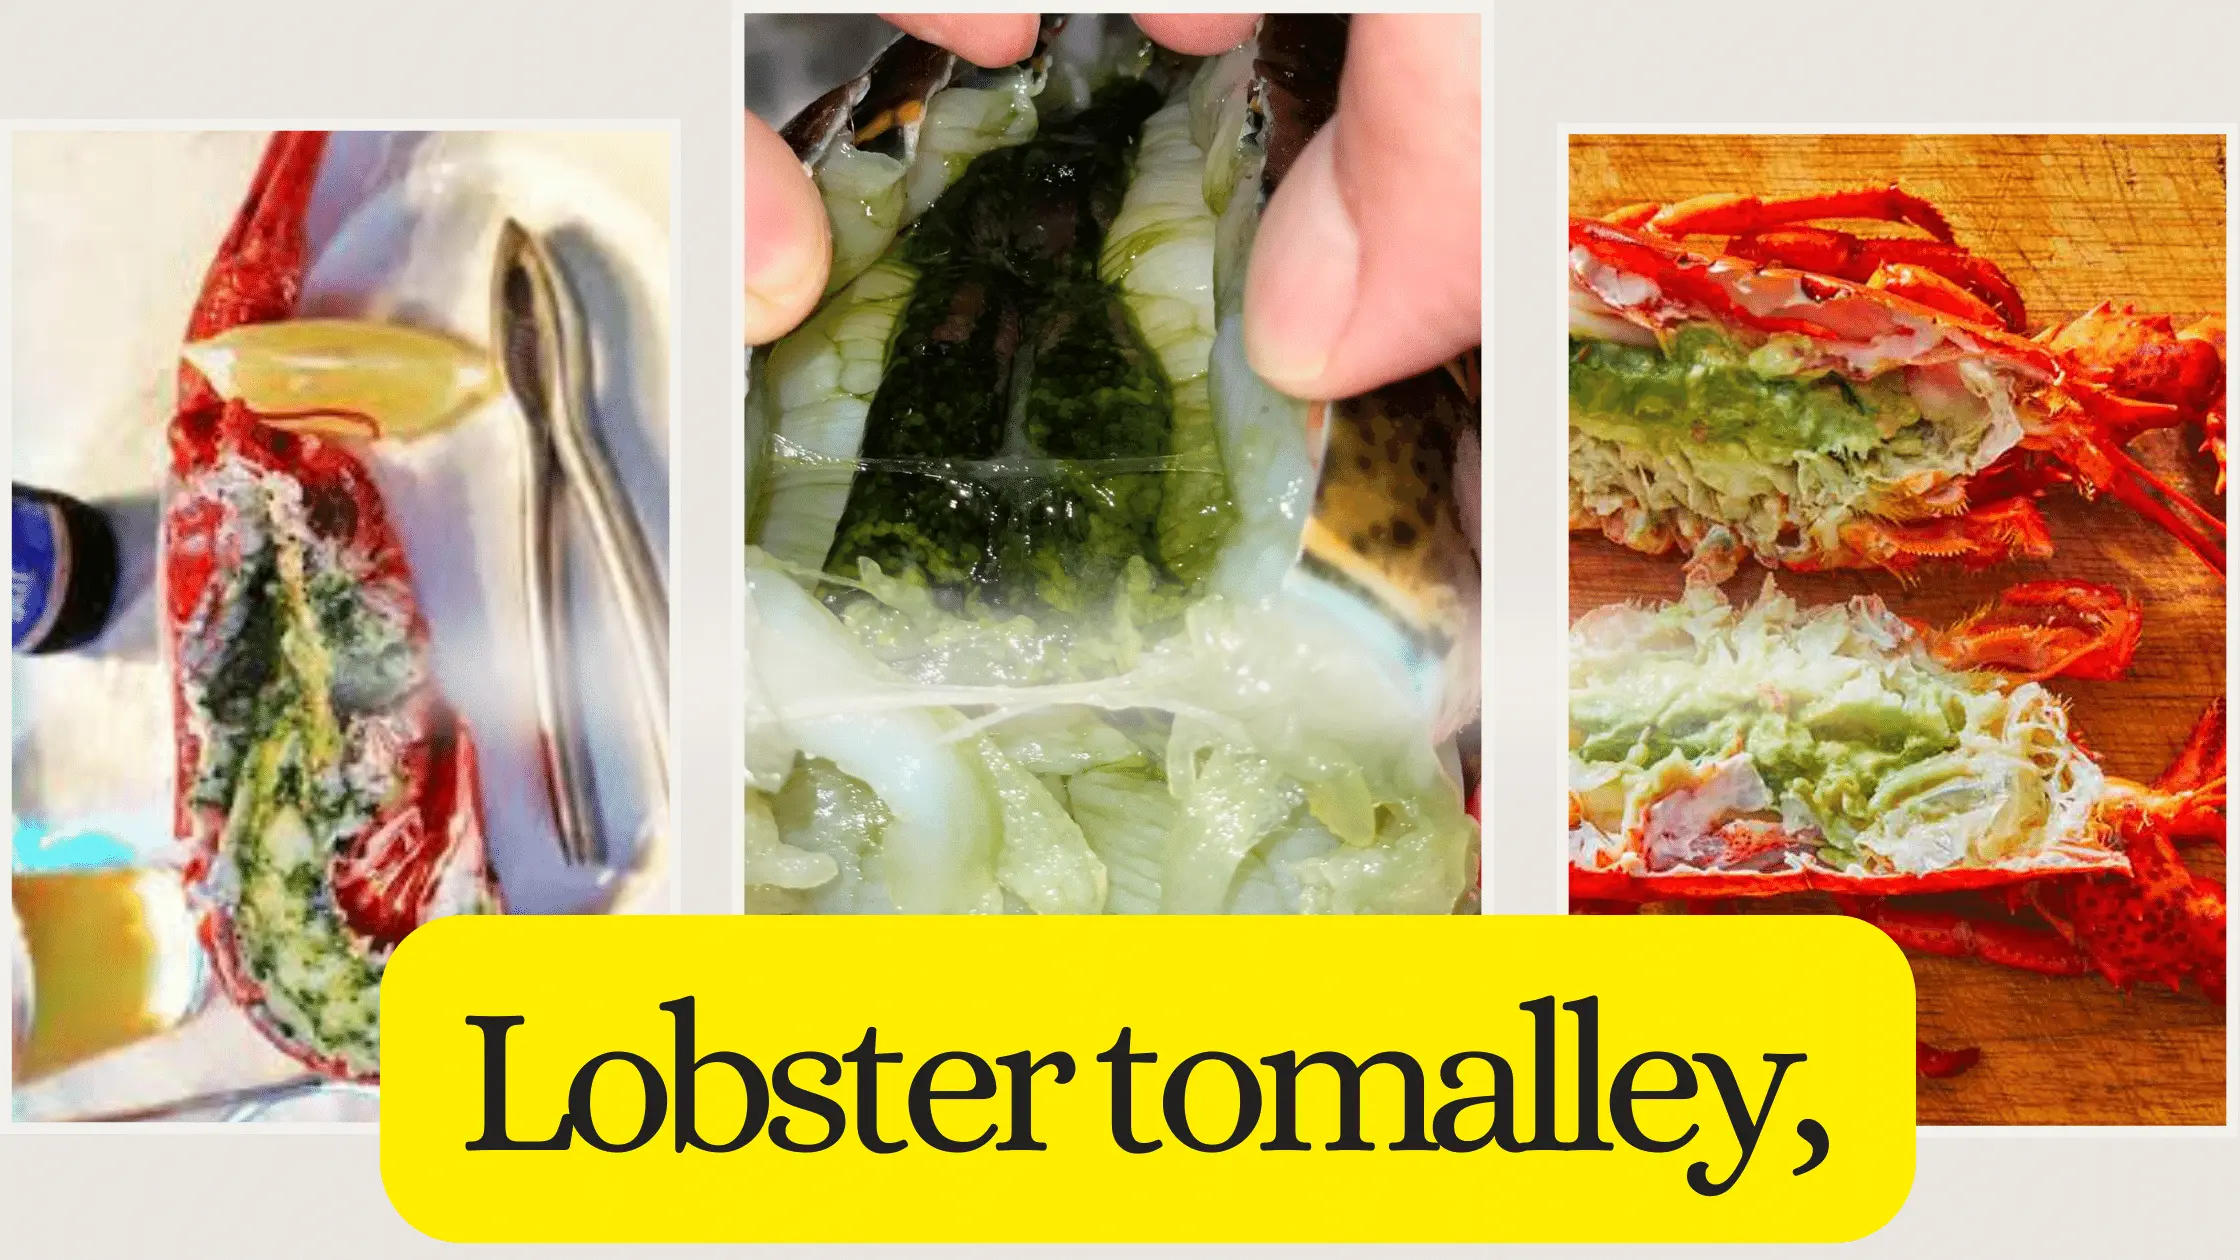 Lobster tomalley